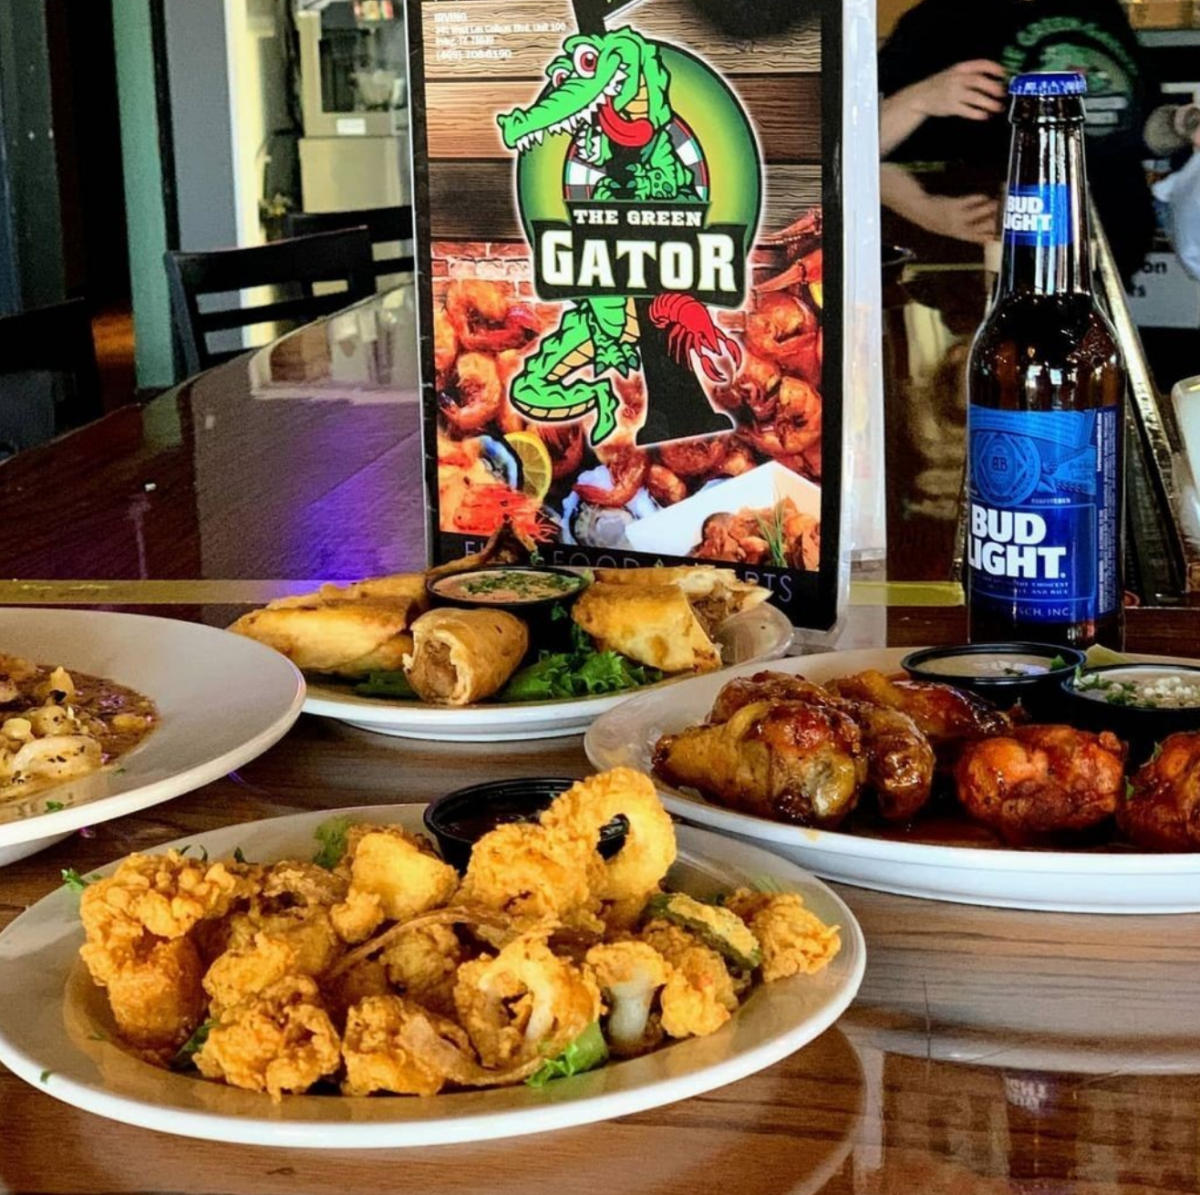 Food And Beer From The Green Gator In Irving, TX